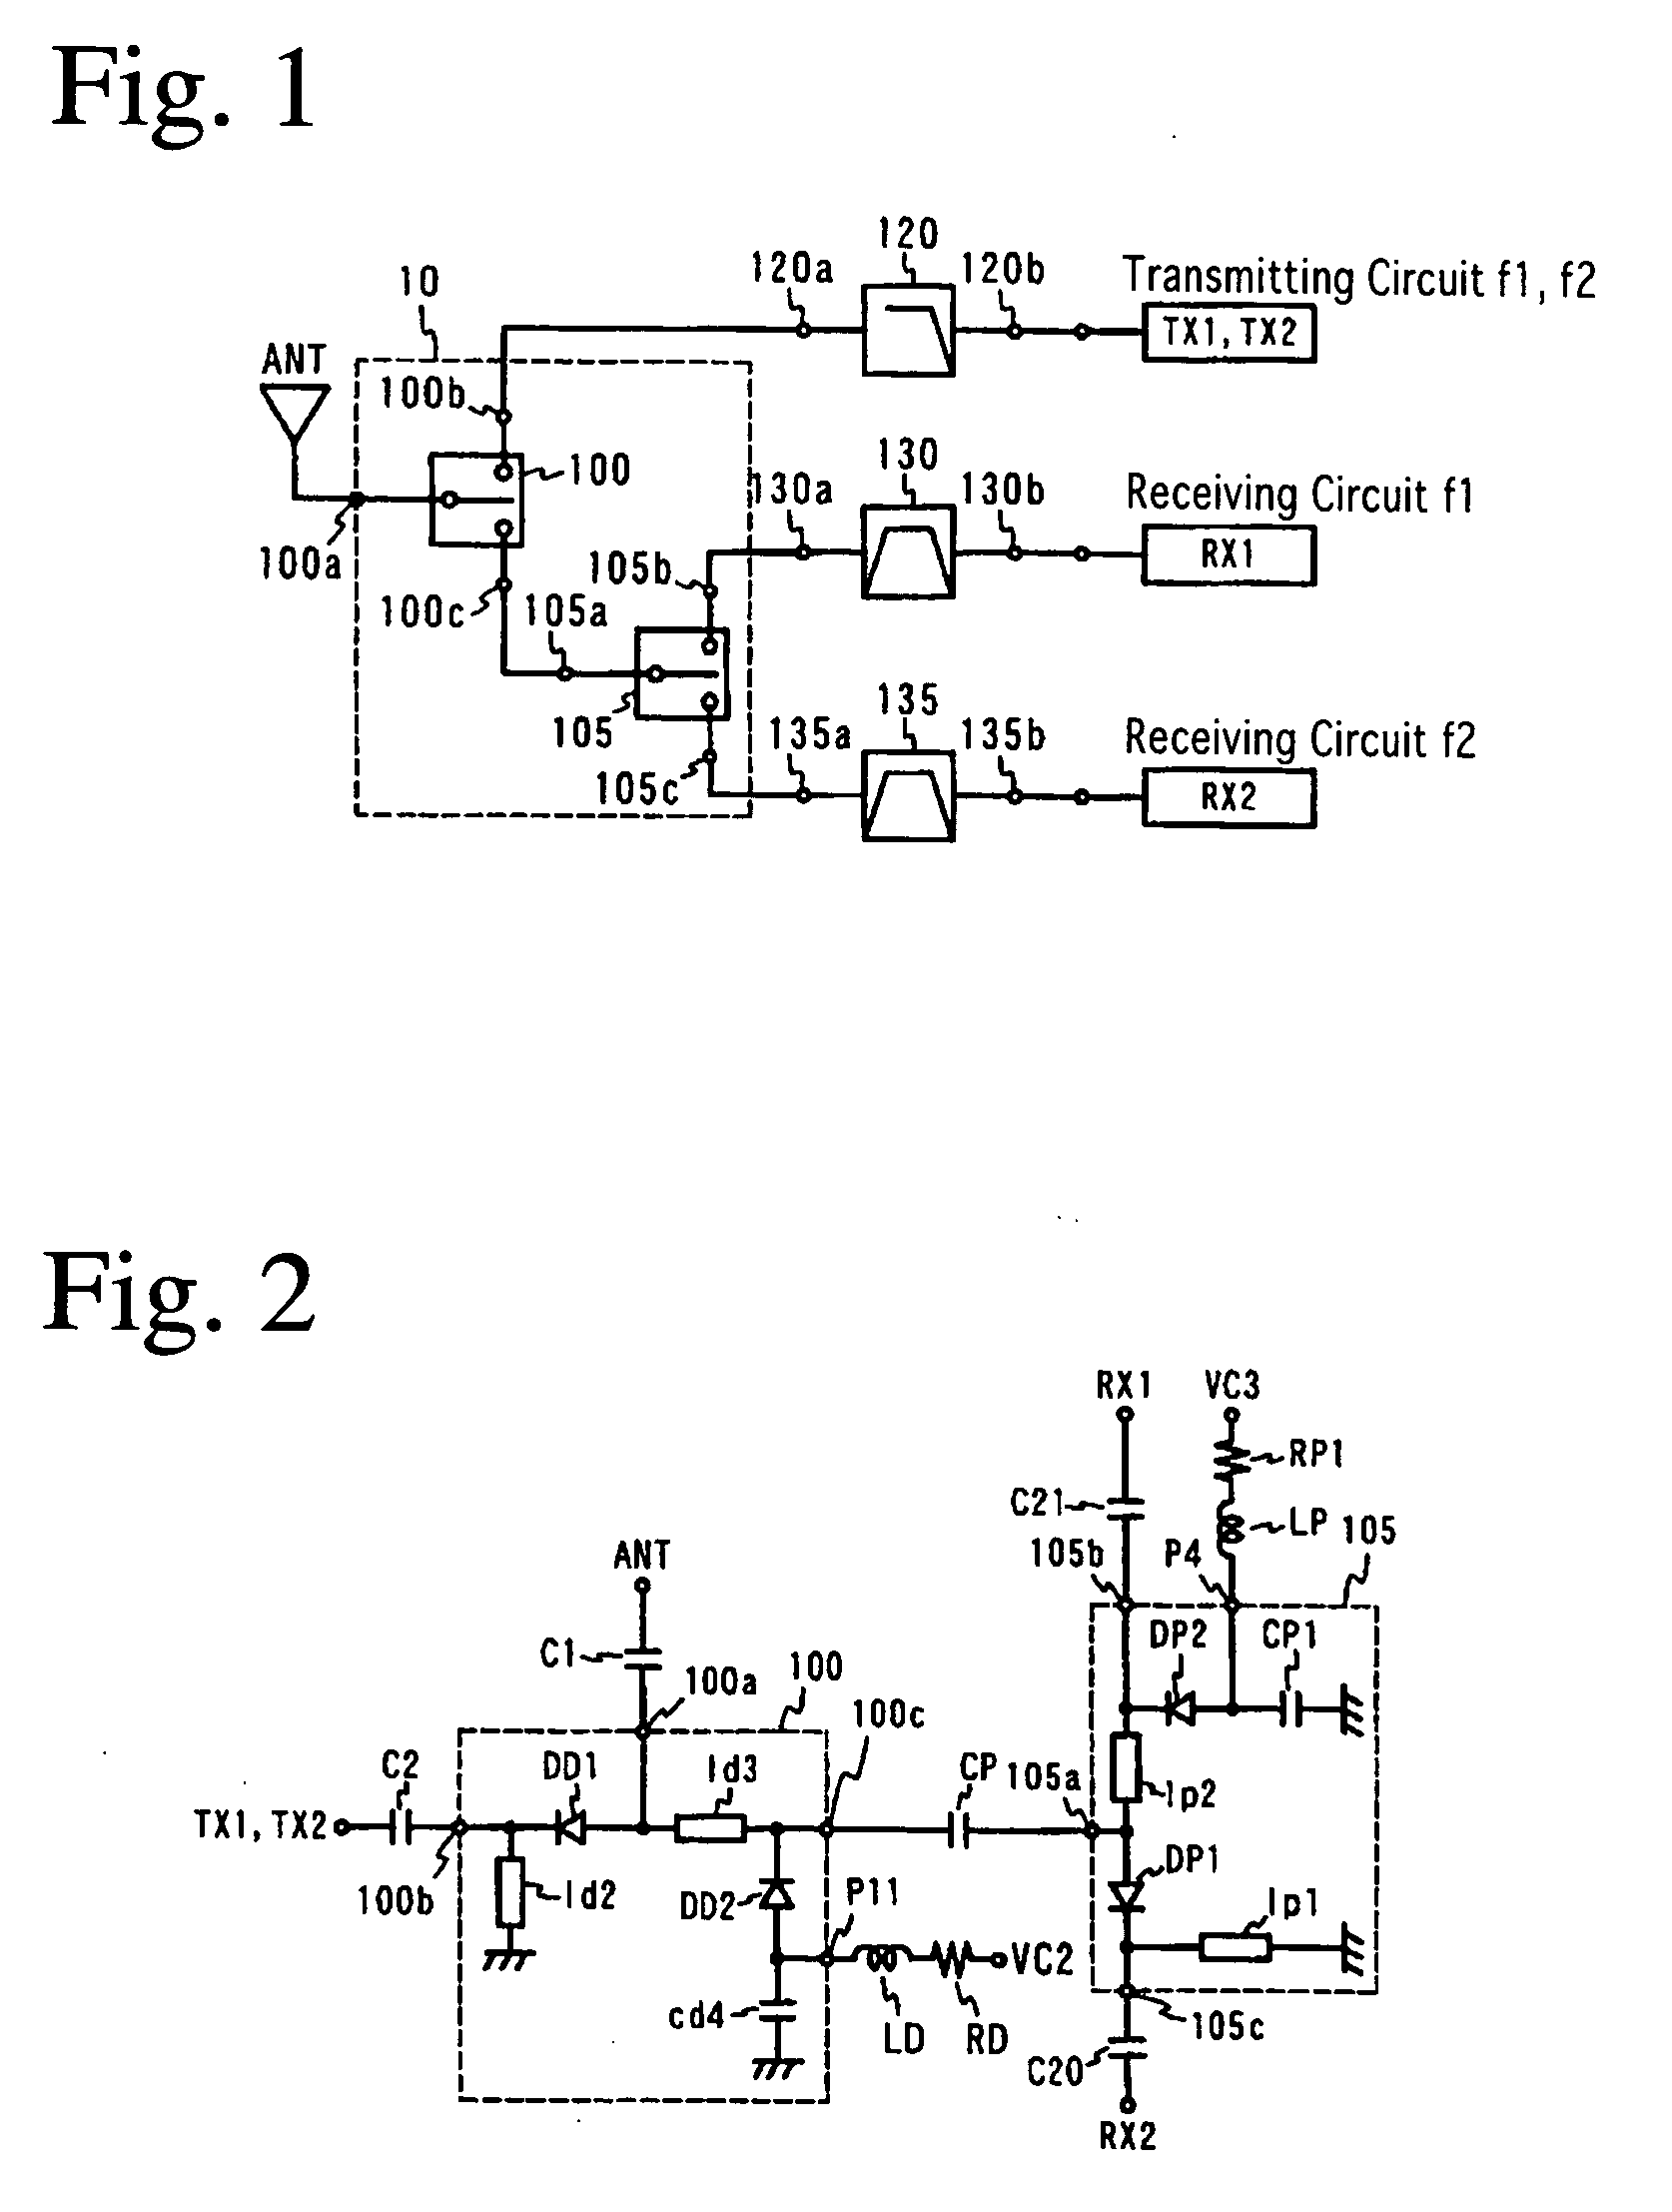 Switch circuit and composite high-frequency part